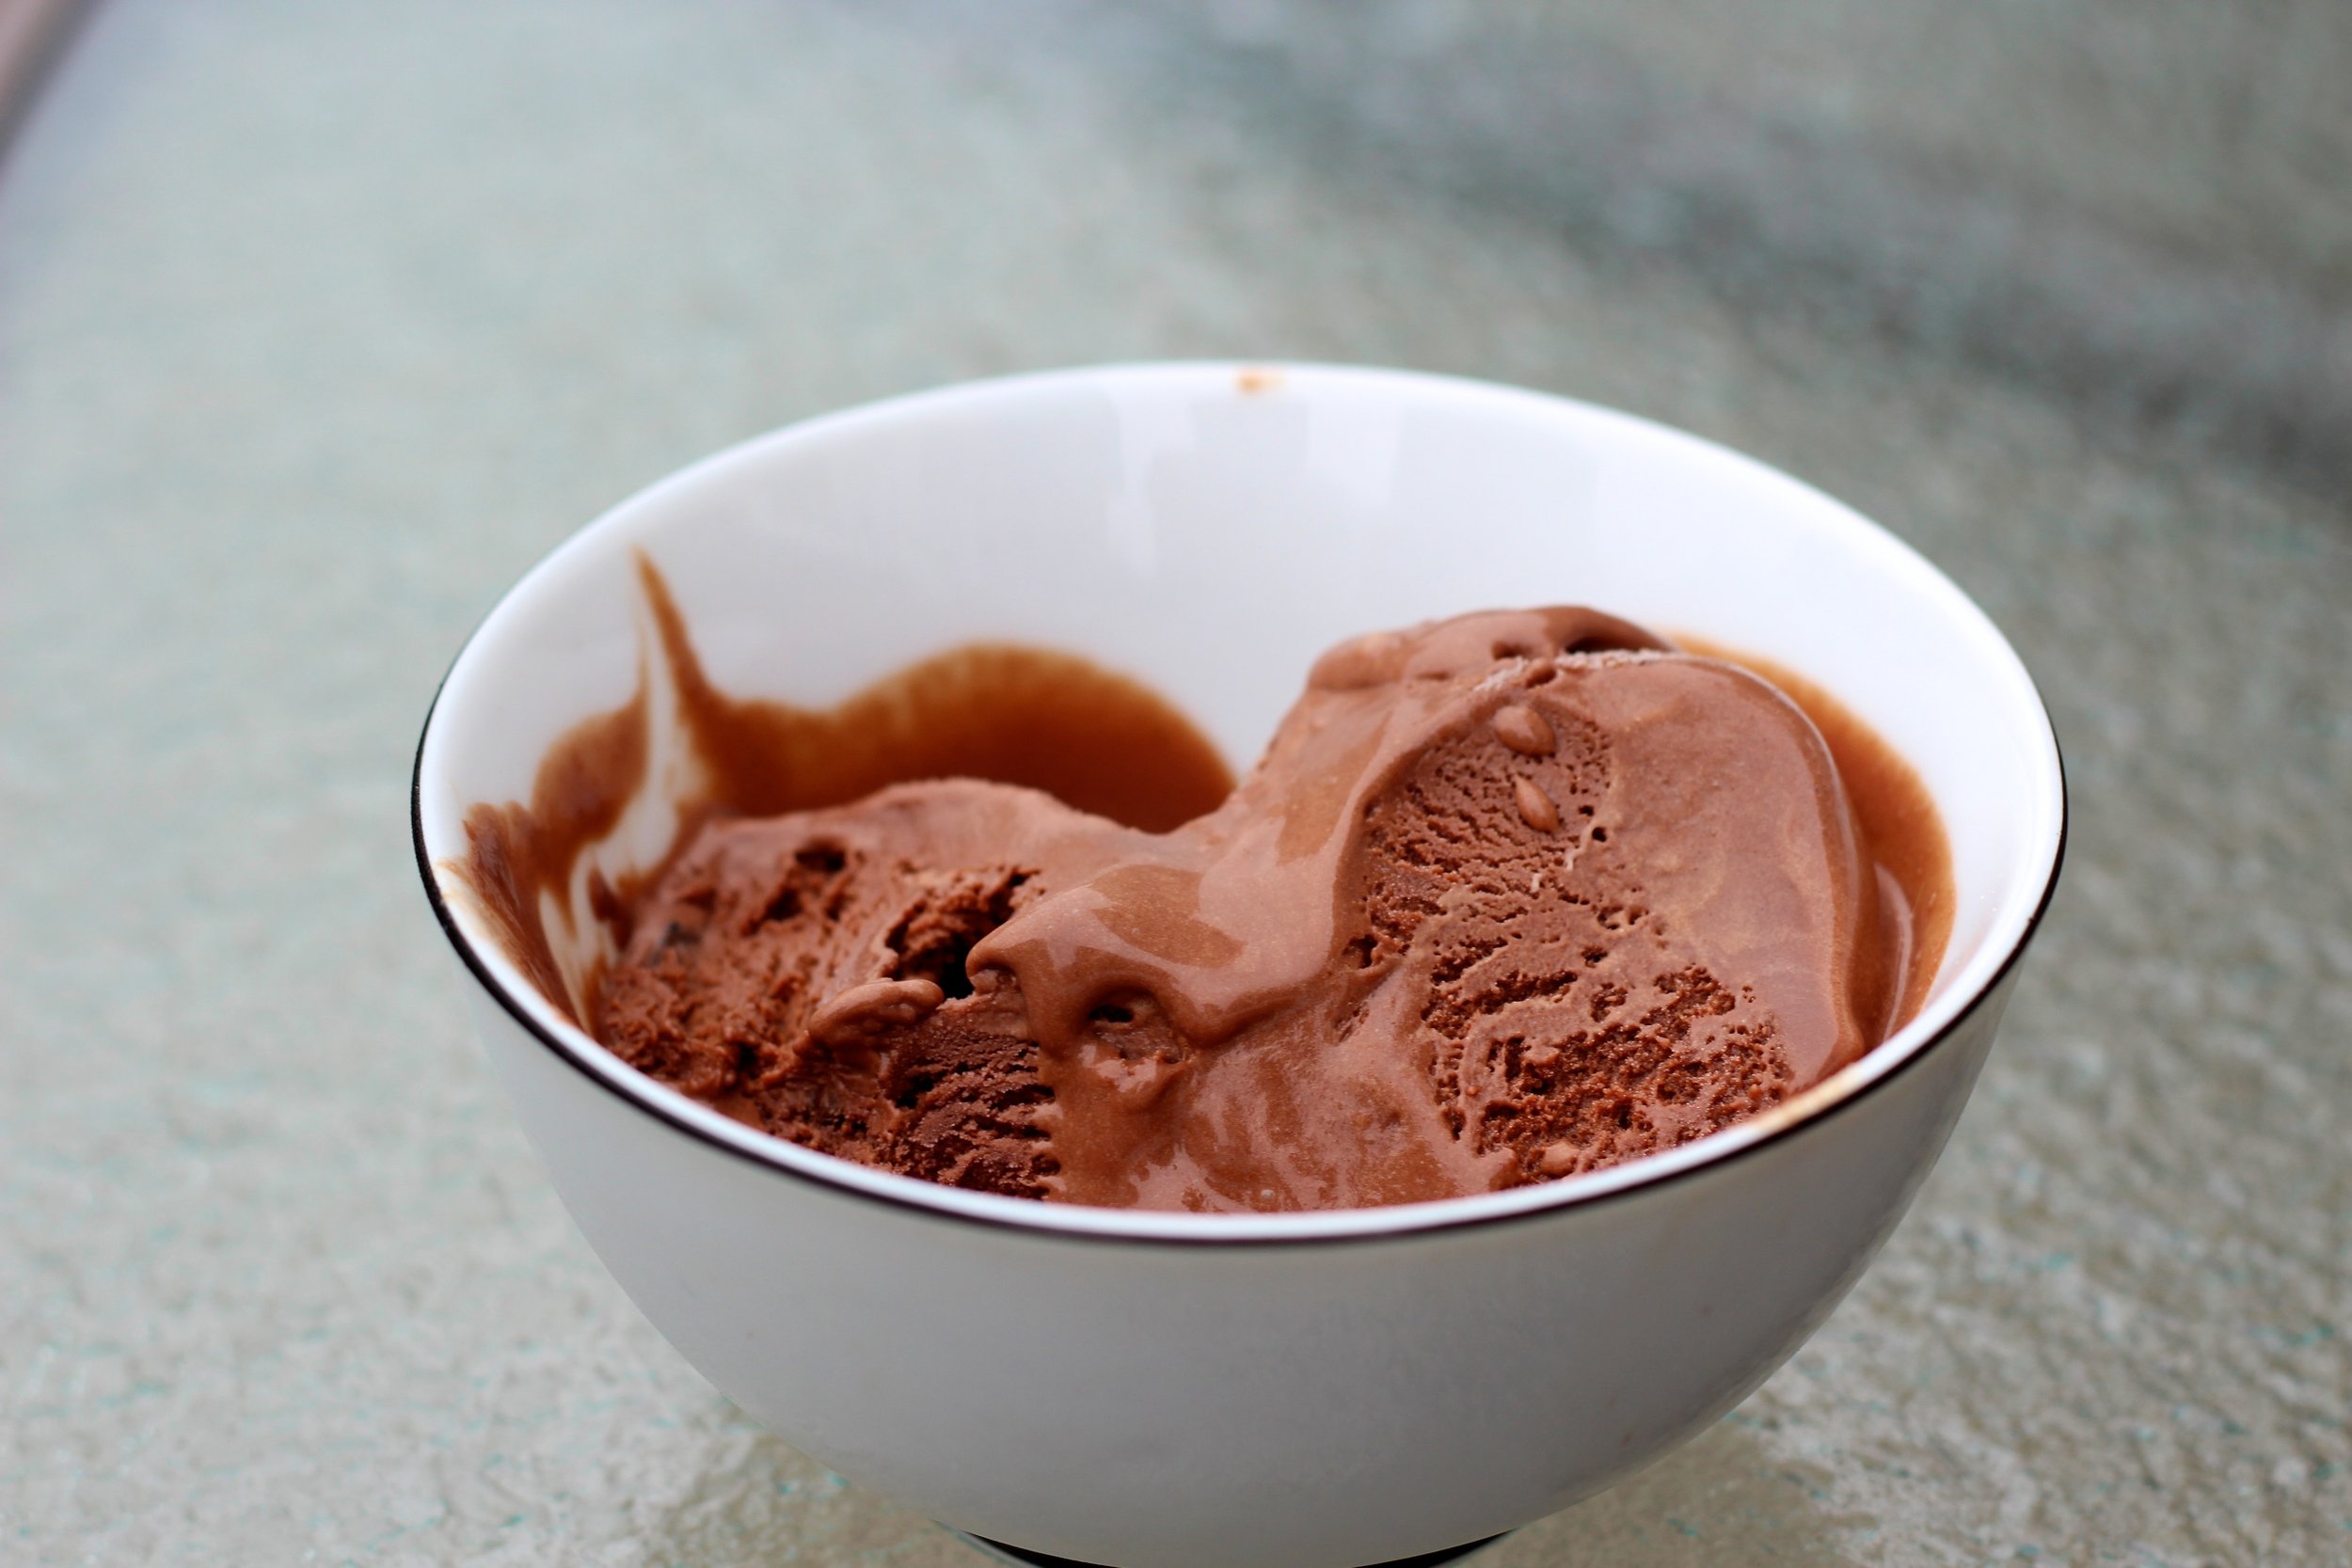 Testing Out the Cuisinart Soft Serve Ice Cream Maker - Eater